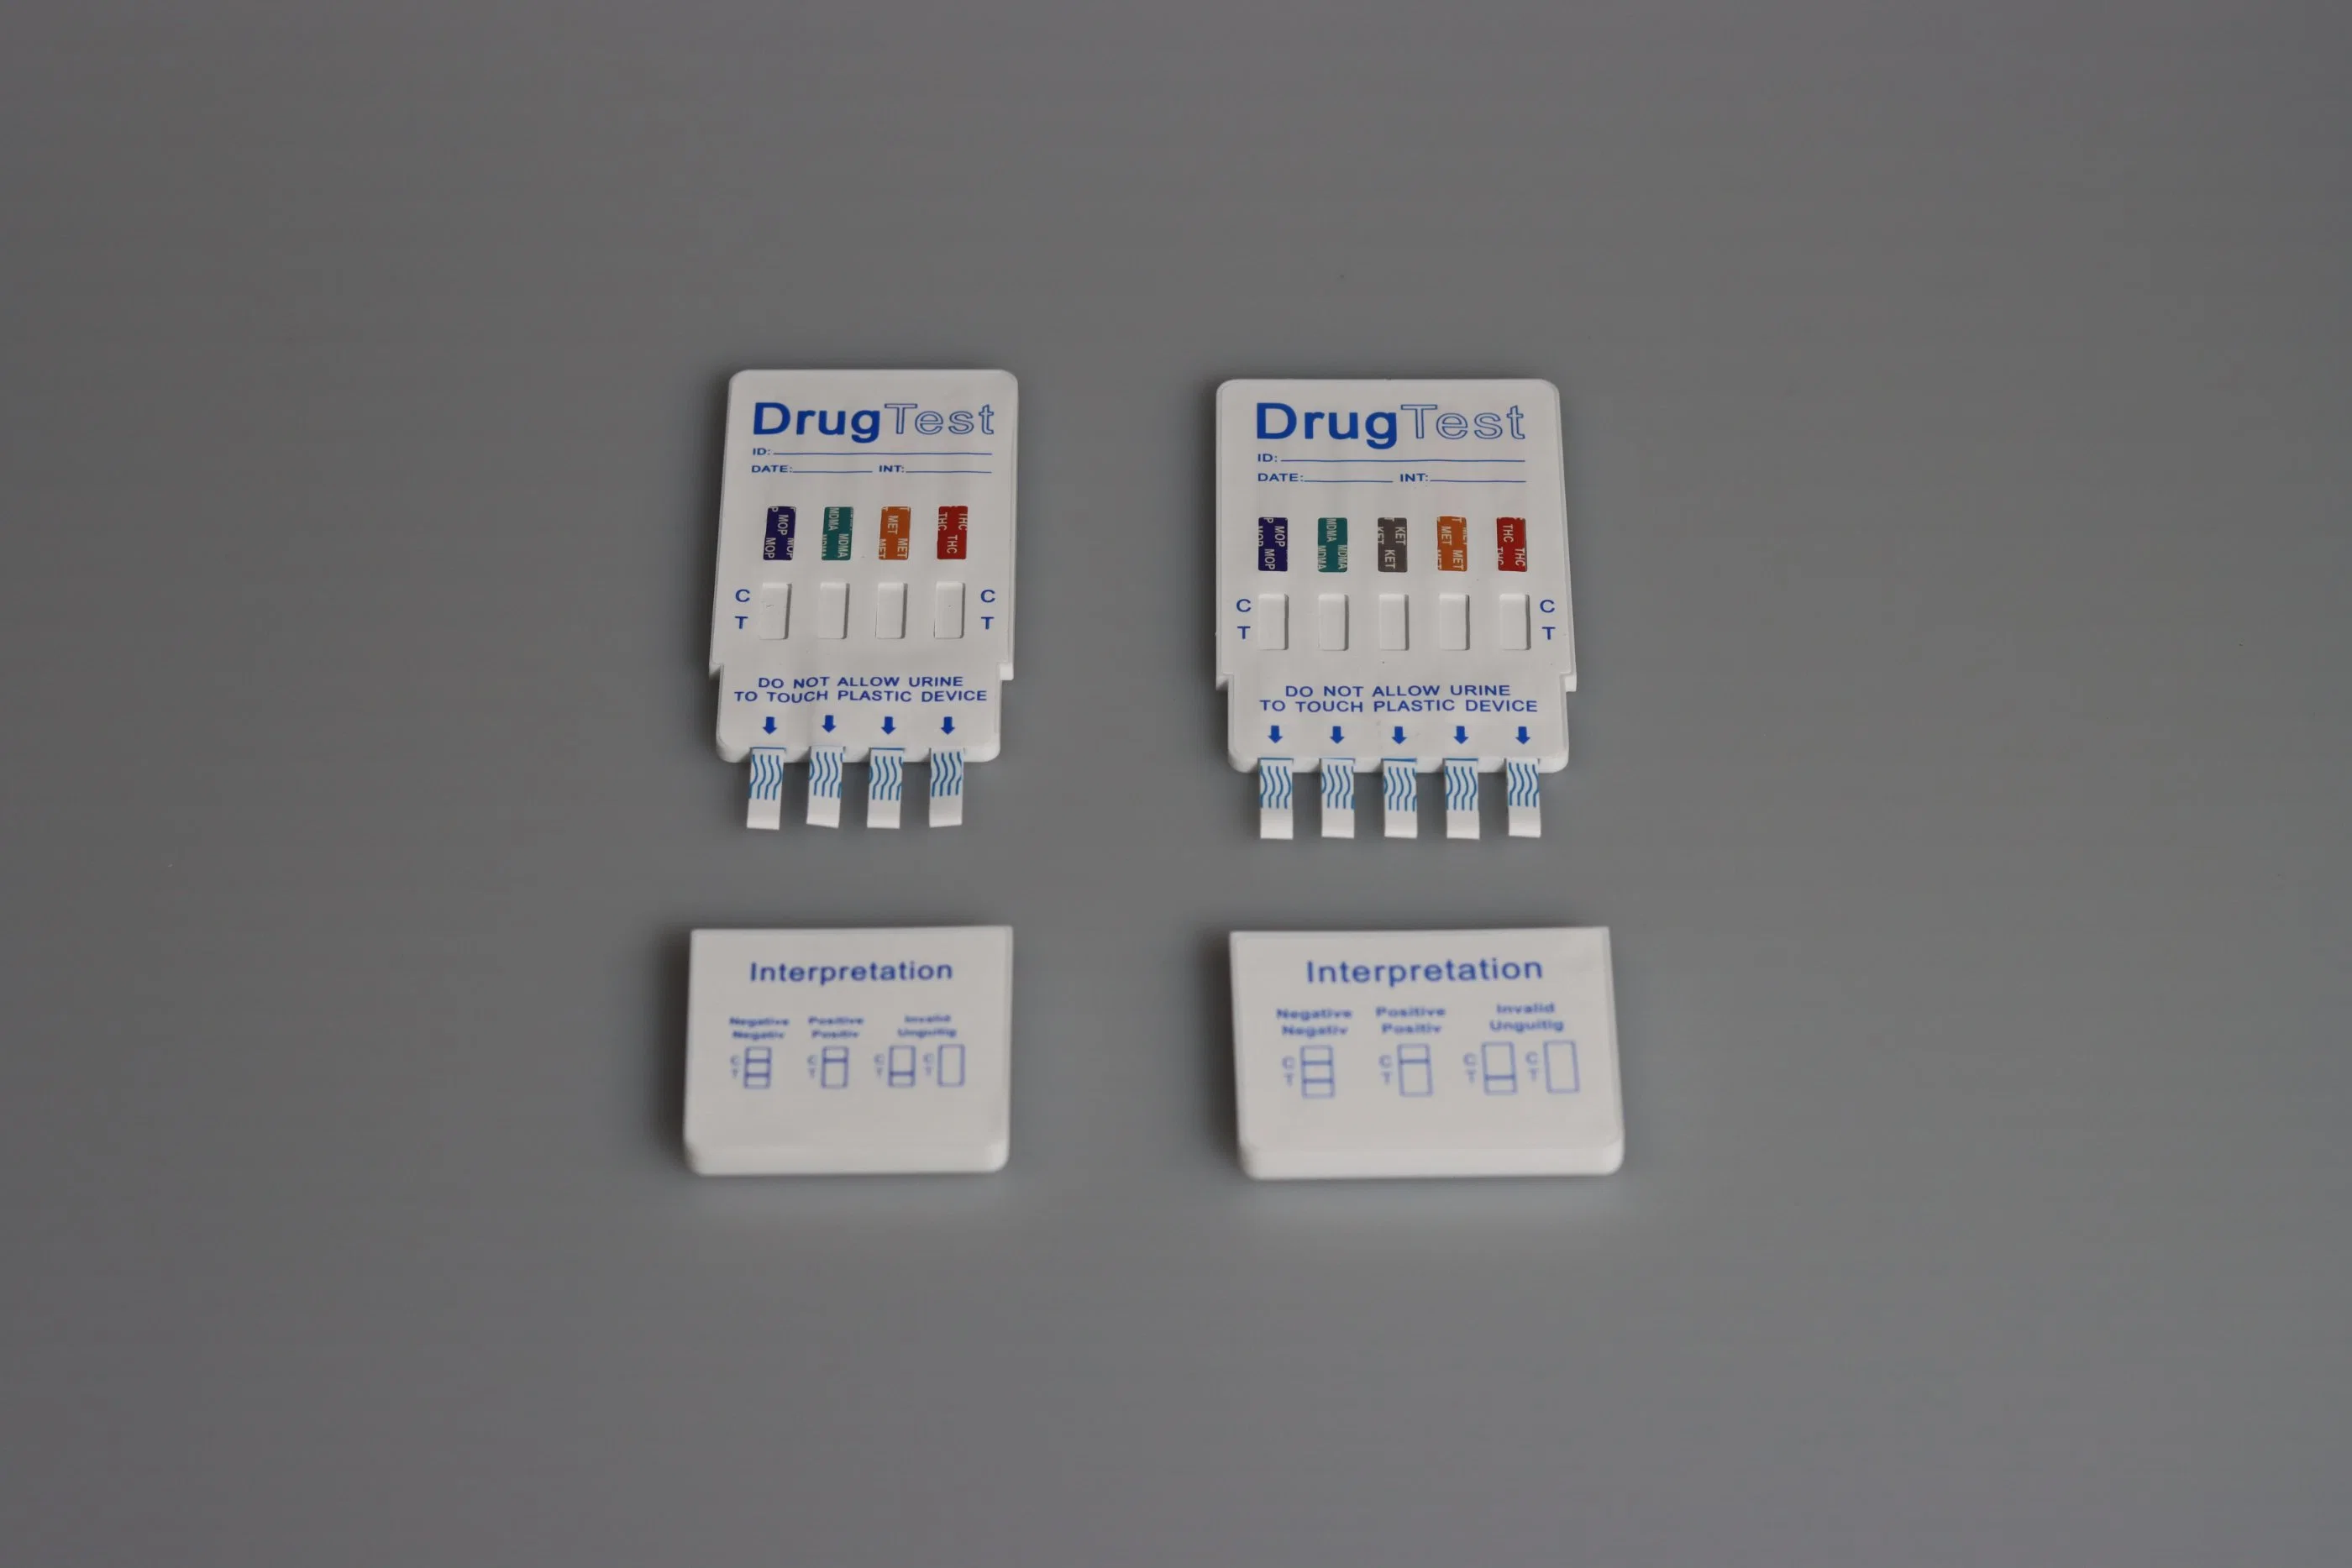 Oxy Oxycodone Test Testsealabs Manufacturer